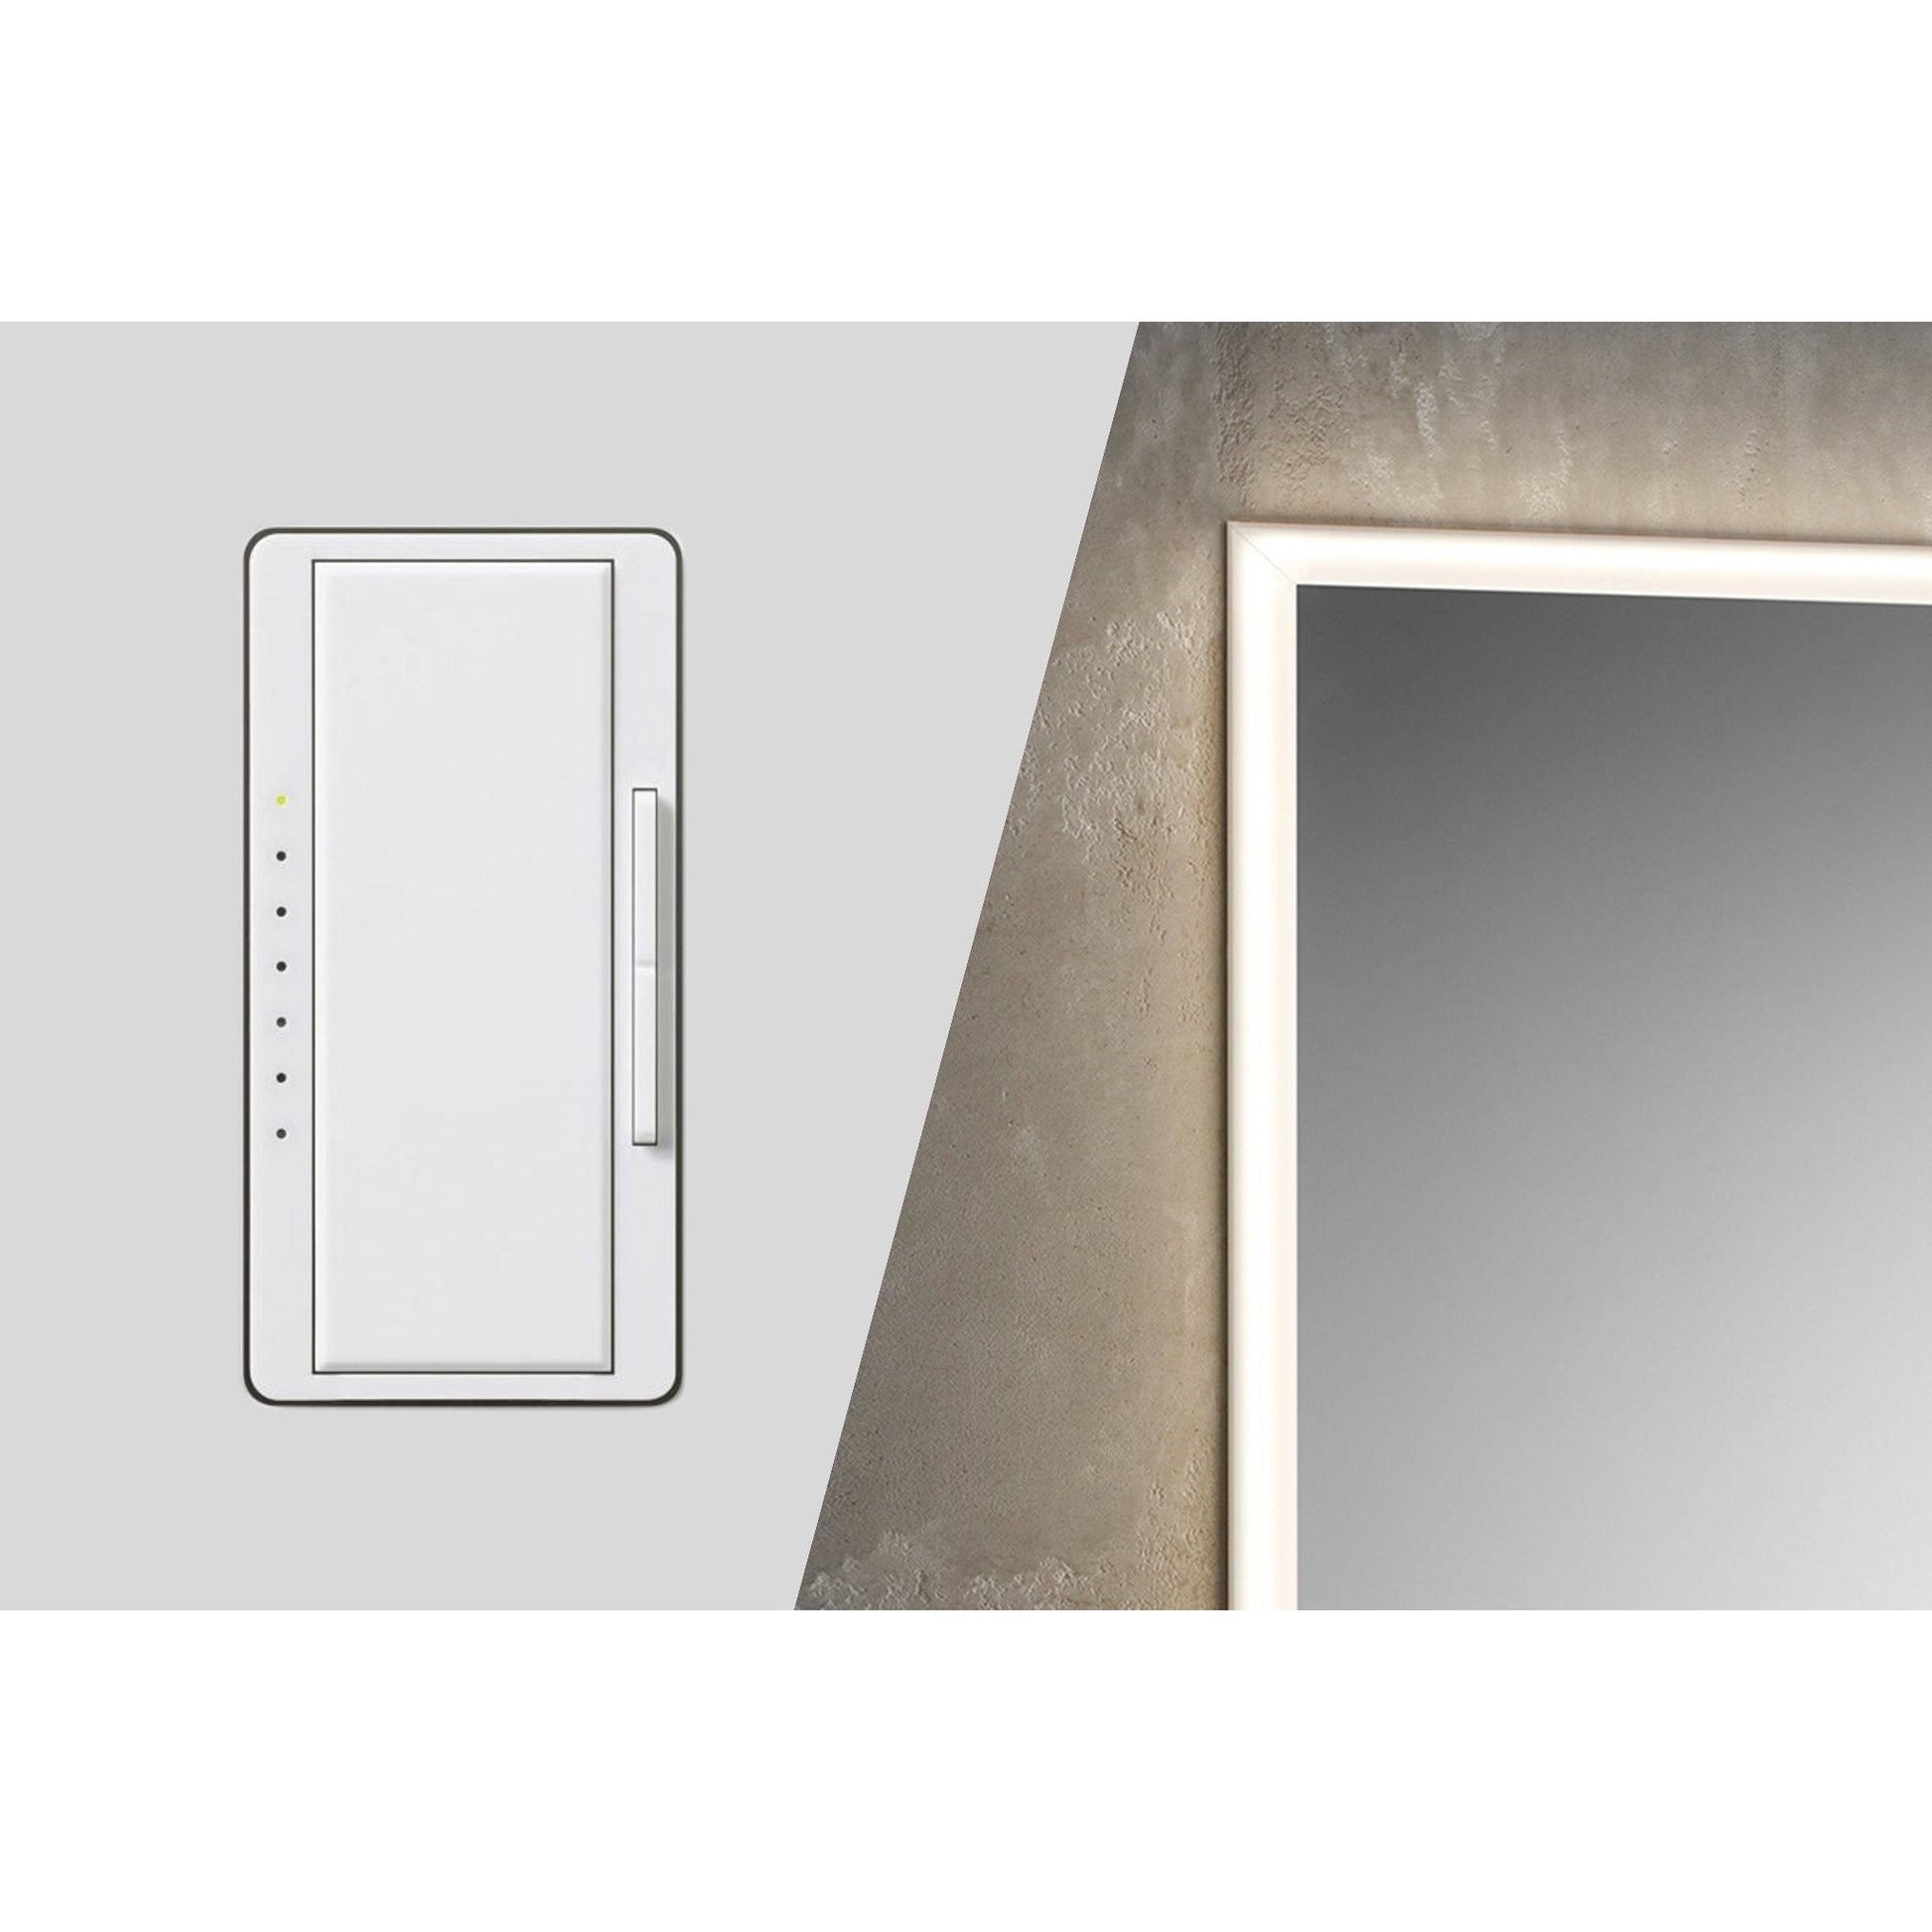 Sidler Quadro 20" x 36" 3000K Single Left Hinged Mirror Door Anodized Aluminum Medicine Cabinet With Night Light Function, Built-in GFCI Outlet and USB port